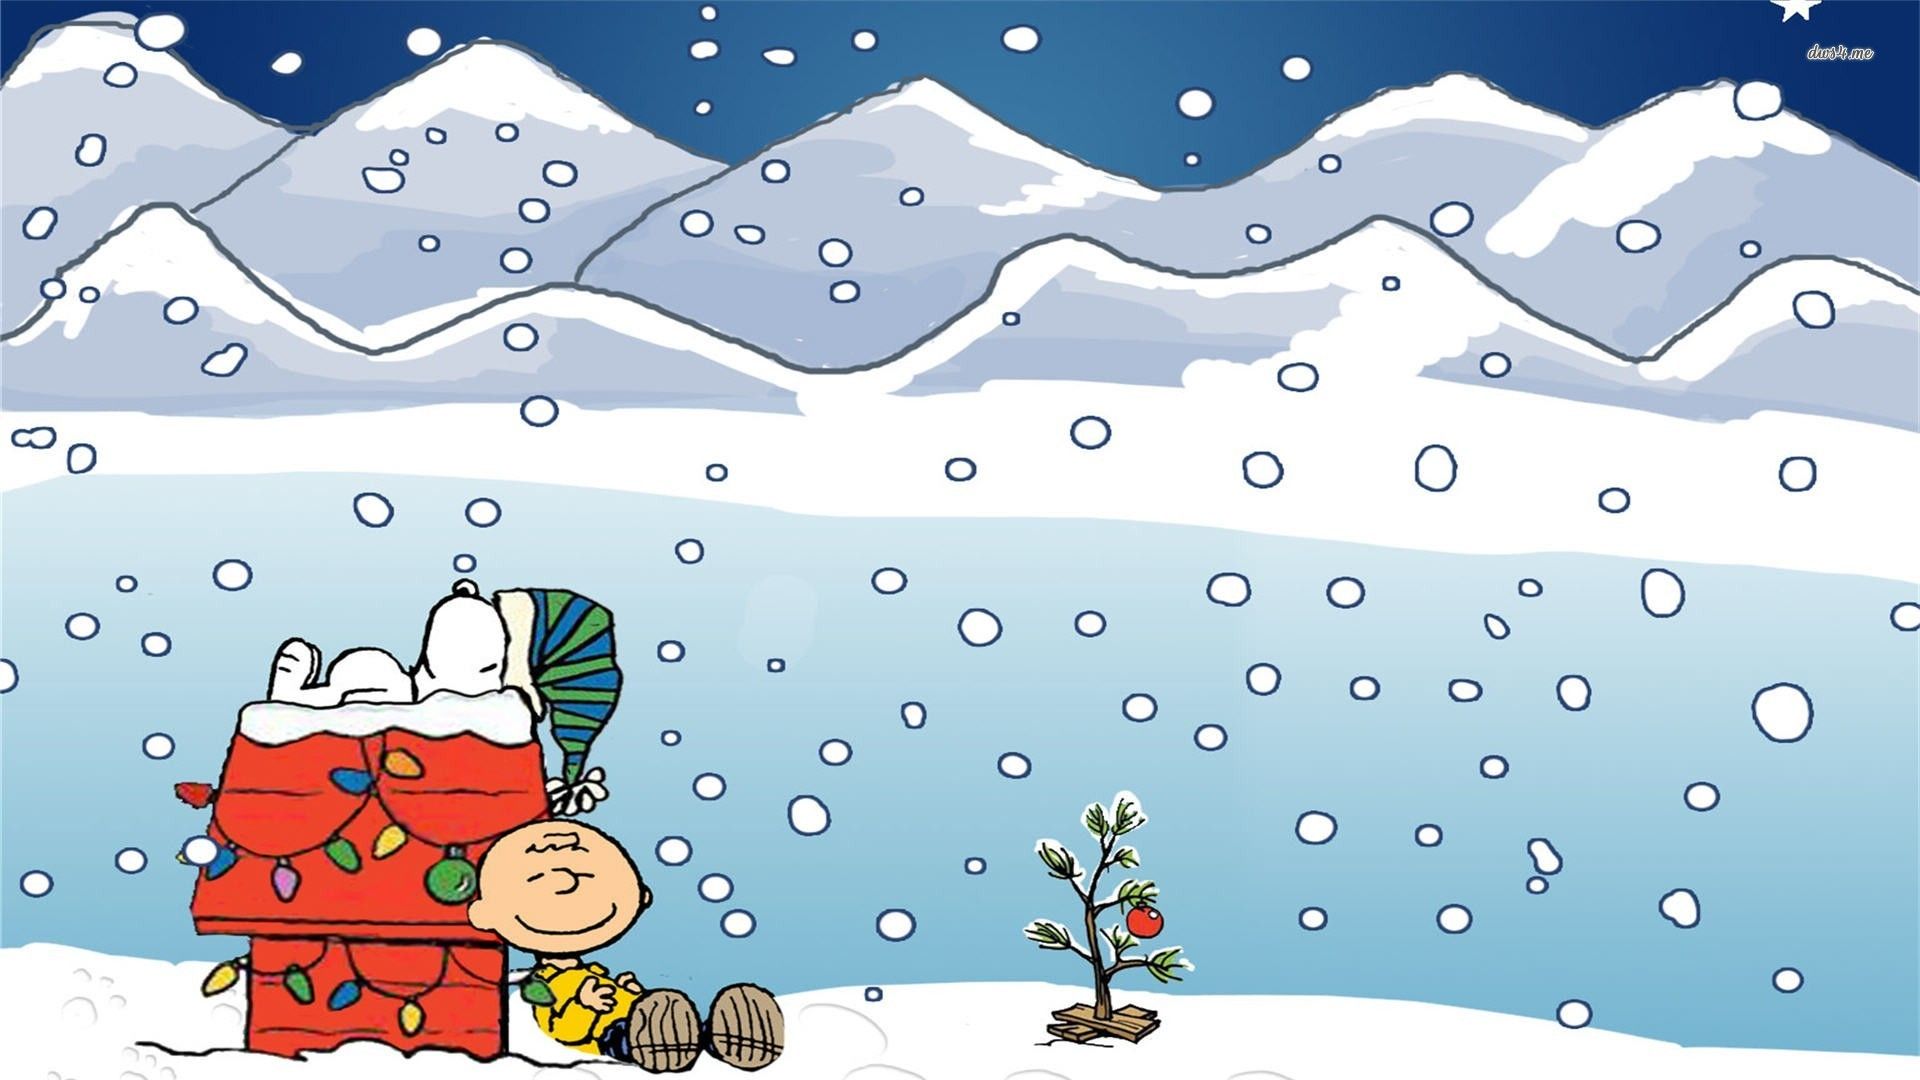 Charlie Brown and Snoopy wallpaper - Cartoon wallpapers - #12189